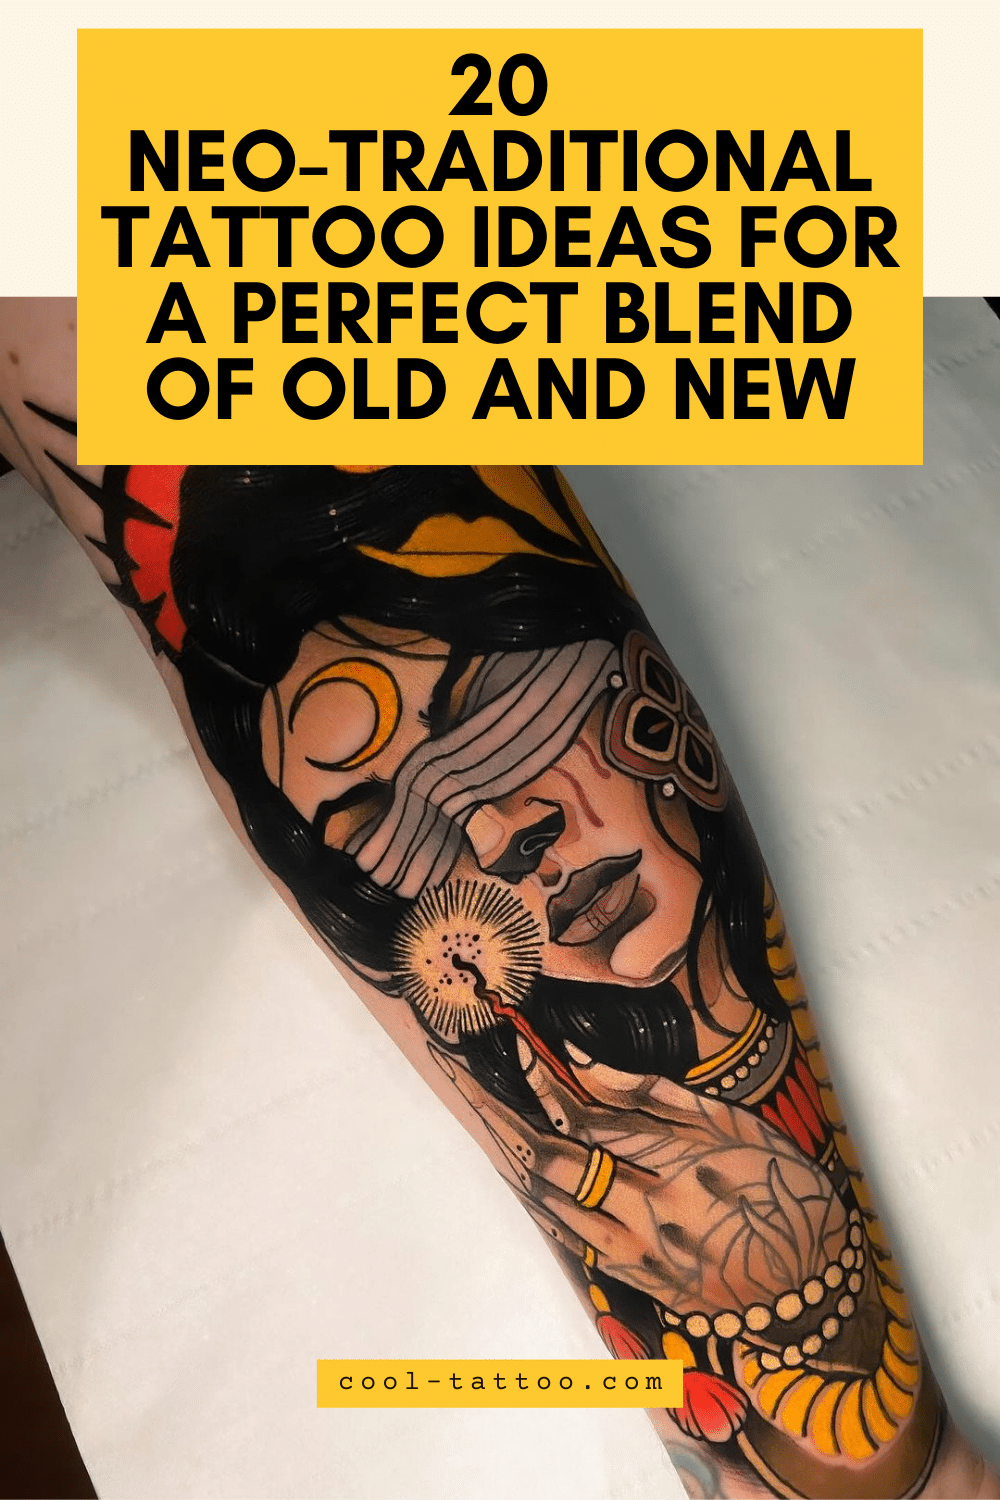 20 Neo-Traditional Tattoo Ideas For A Perfect Blend Of Old And New